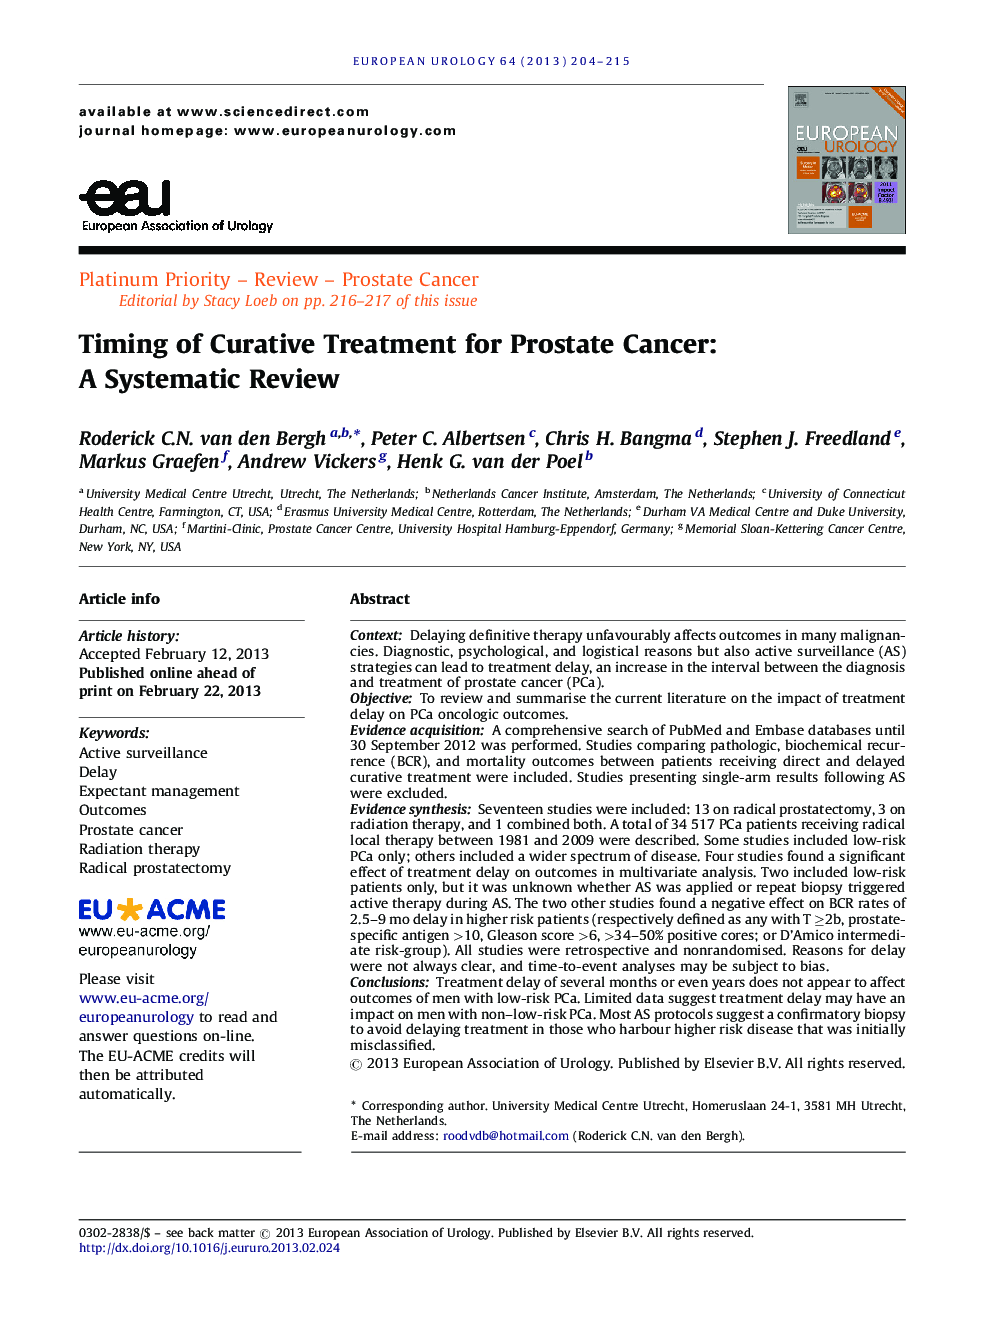 Timing of Curative Treatment for Prostate Cancer: A Systematic Review 